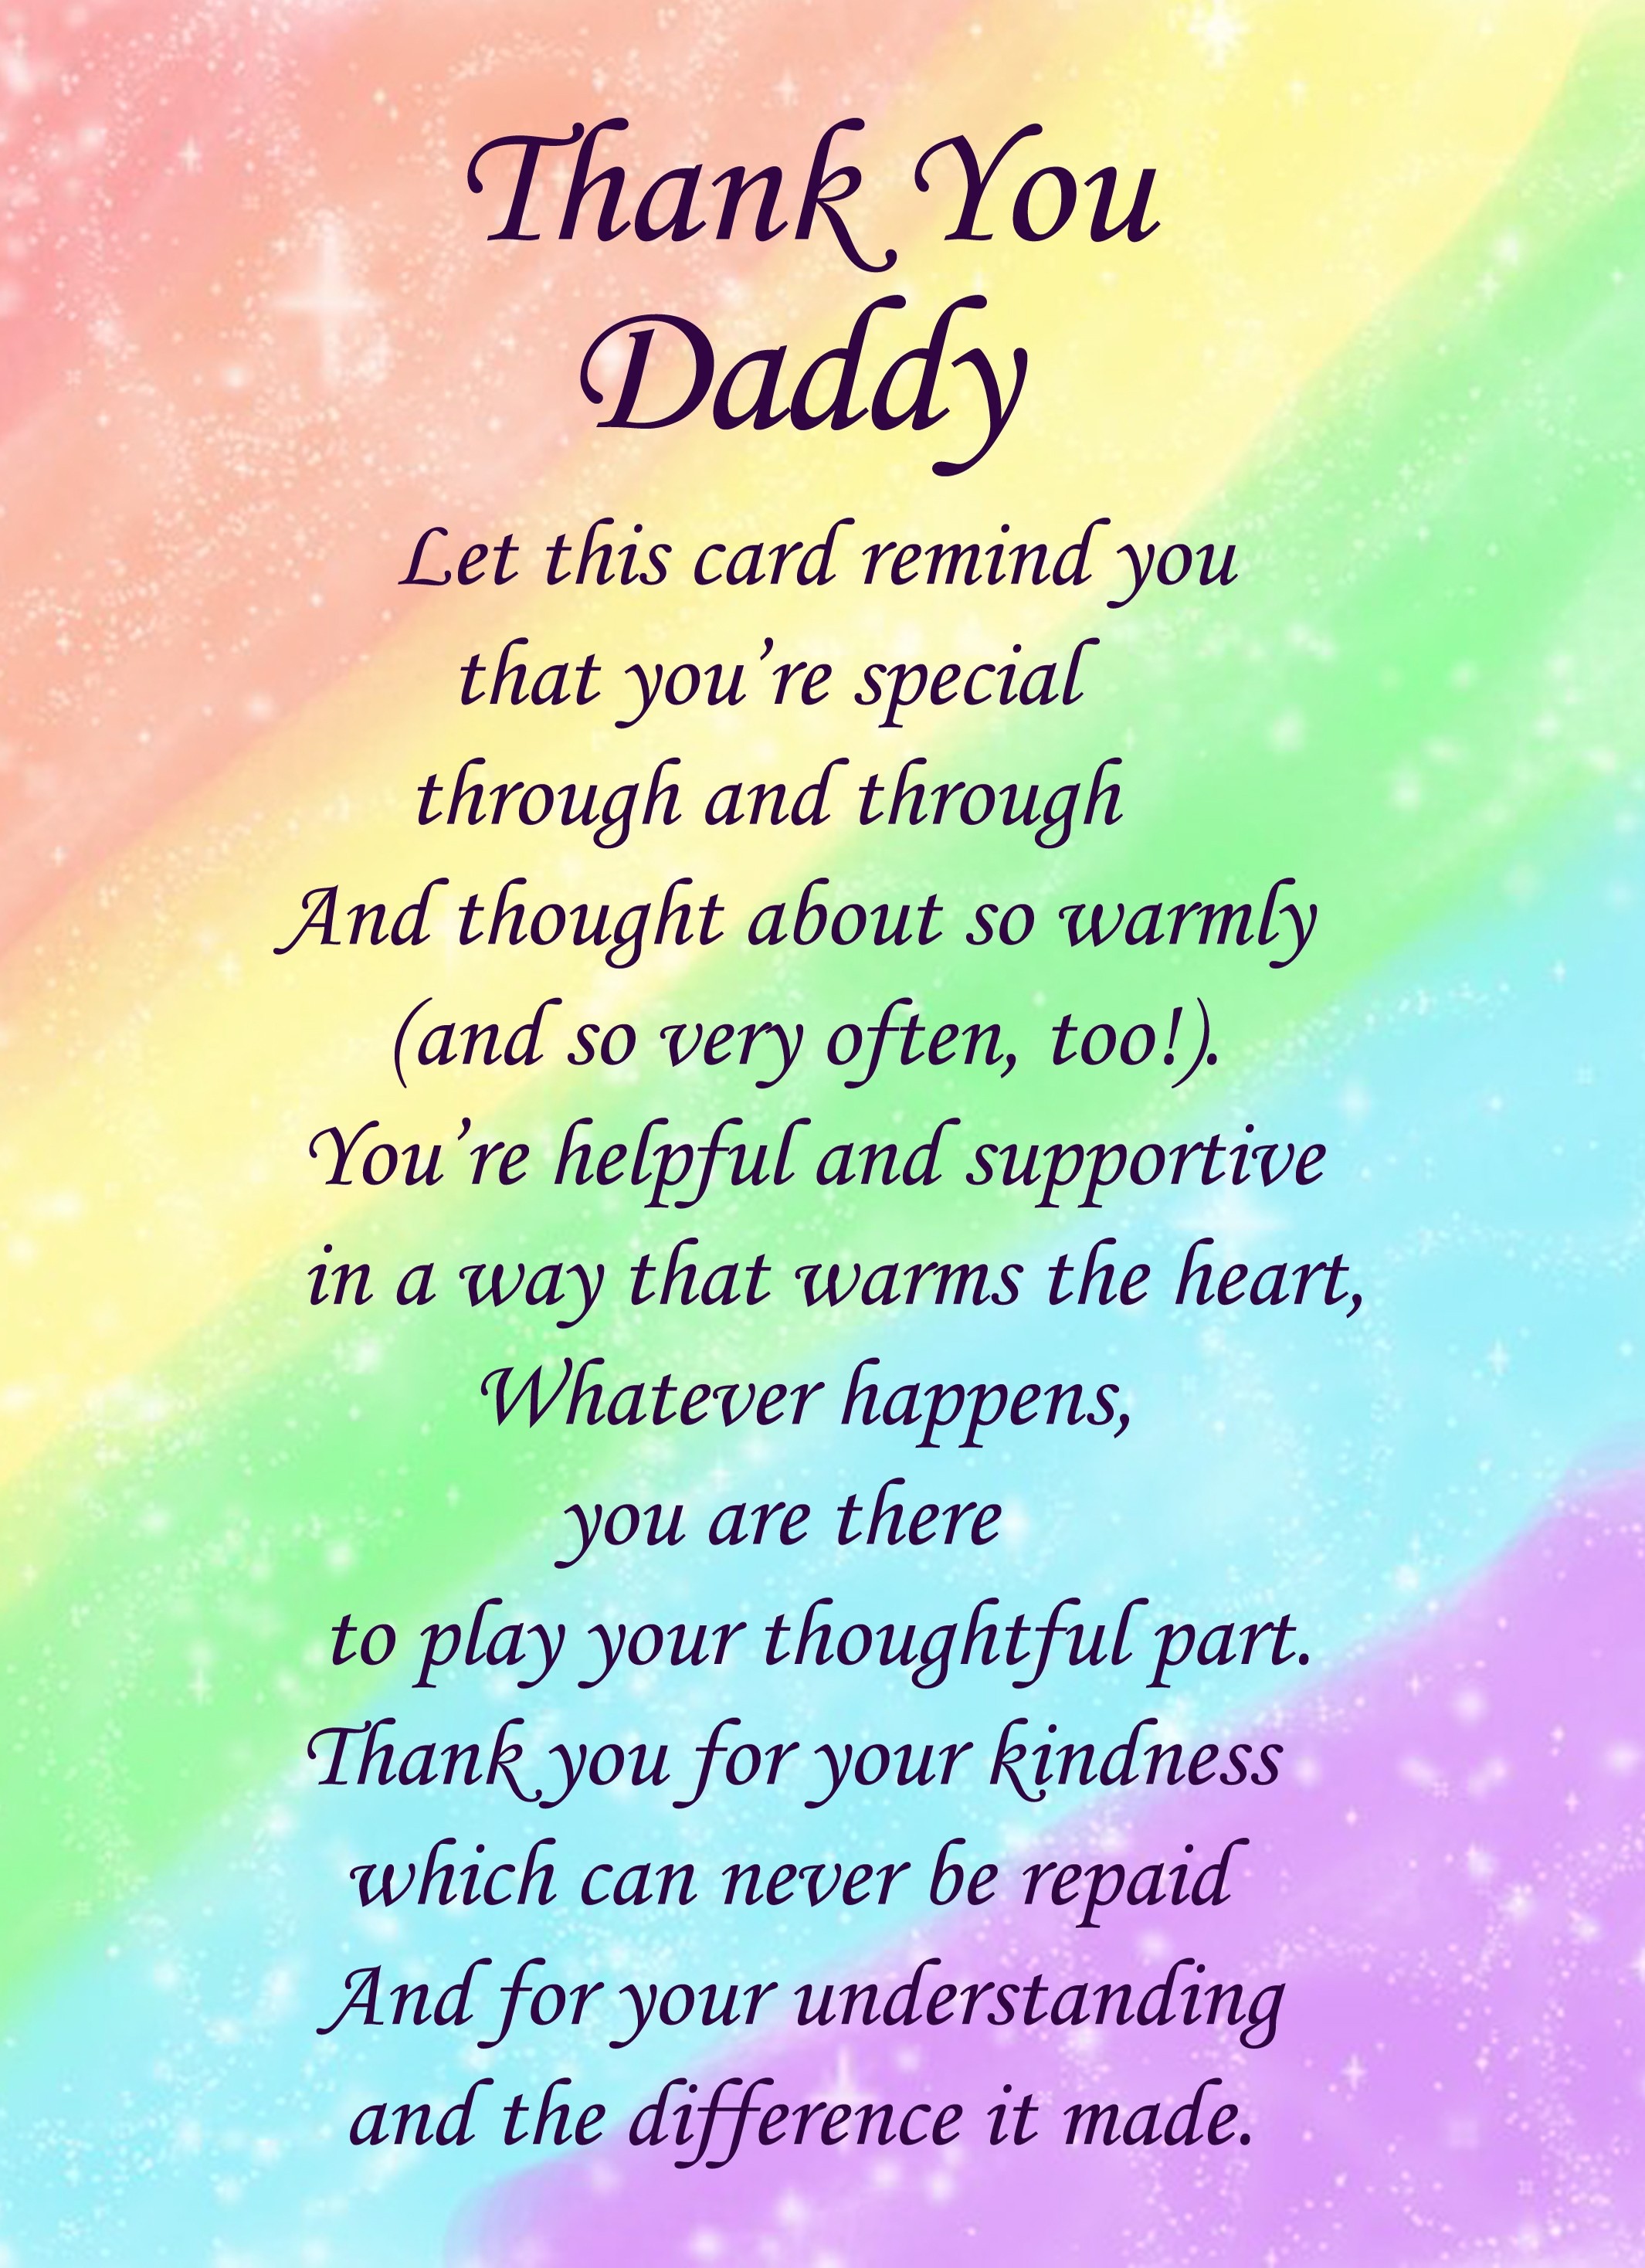 Thank You 'Daddy' Poem Verse Greeting Card